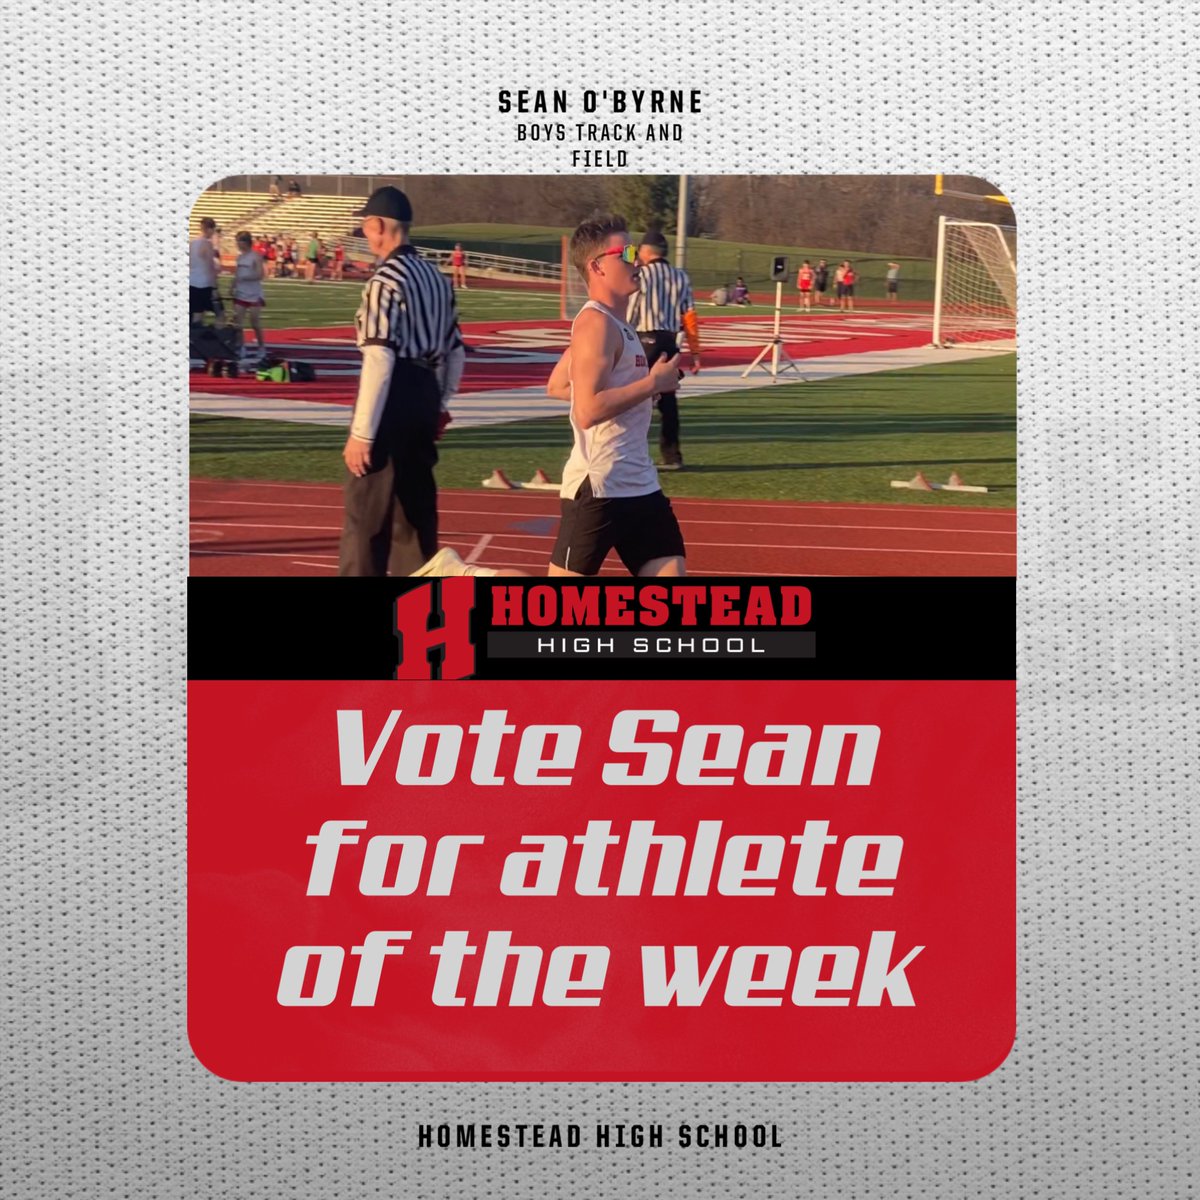 Sean is up for athlete of the week following his record breaking 55m and 60m indoor state podium. Give him some votes! jsonline.com/story/sports/h…